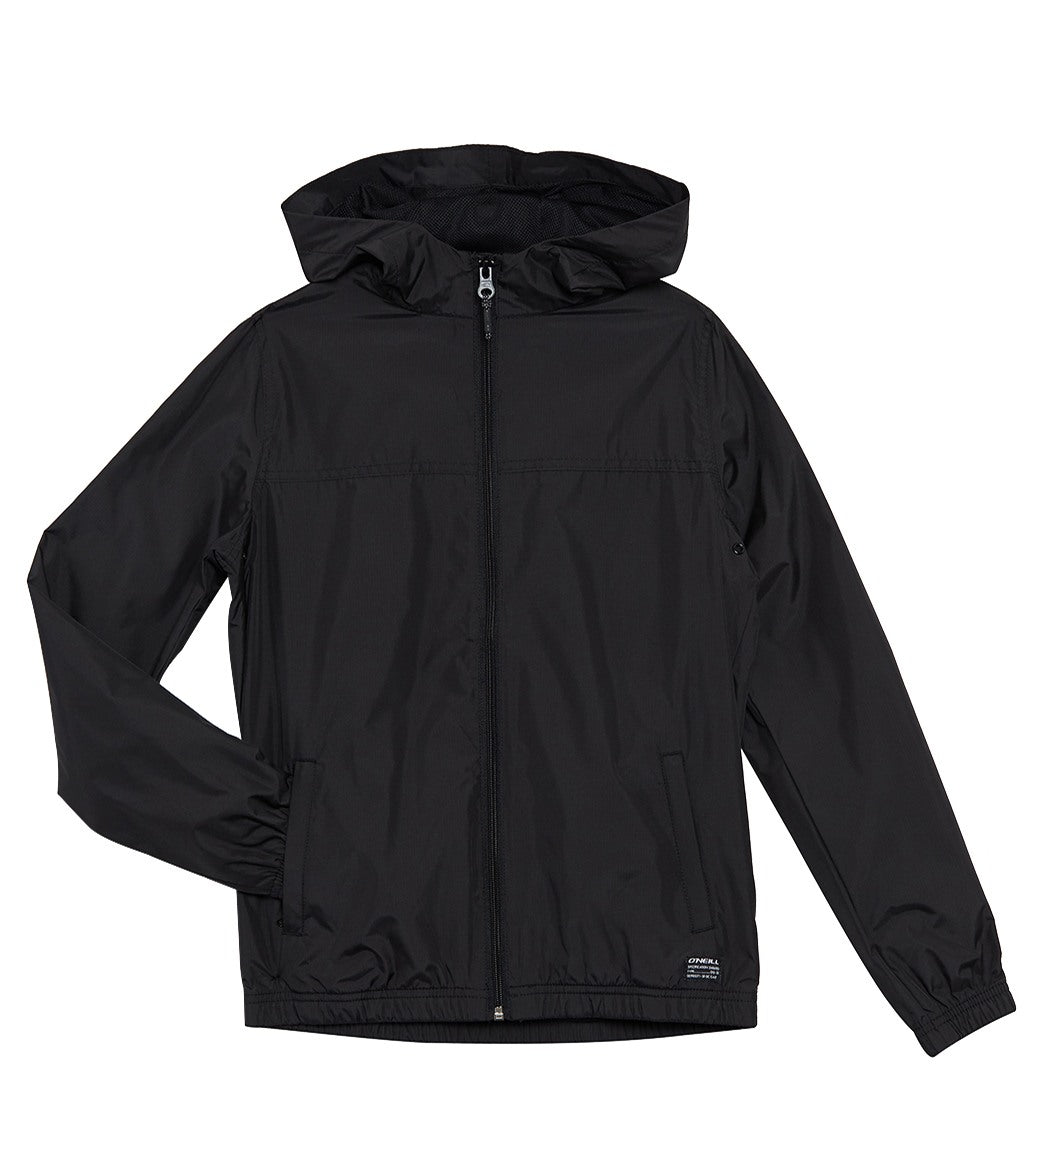 O'neill Boys' Del Ray Packable Windbreaker Jacket Big Kid - Black Small 8 Cotton/Polyester - Swimoutlet.com